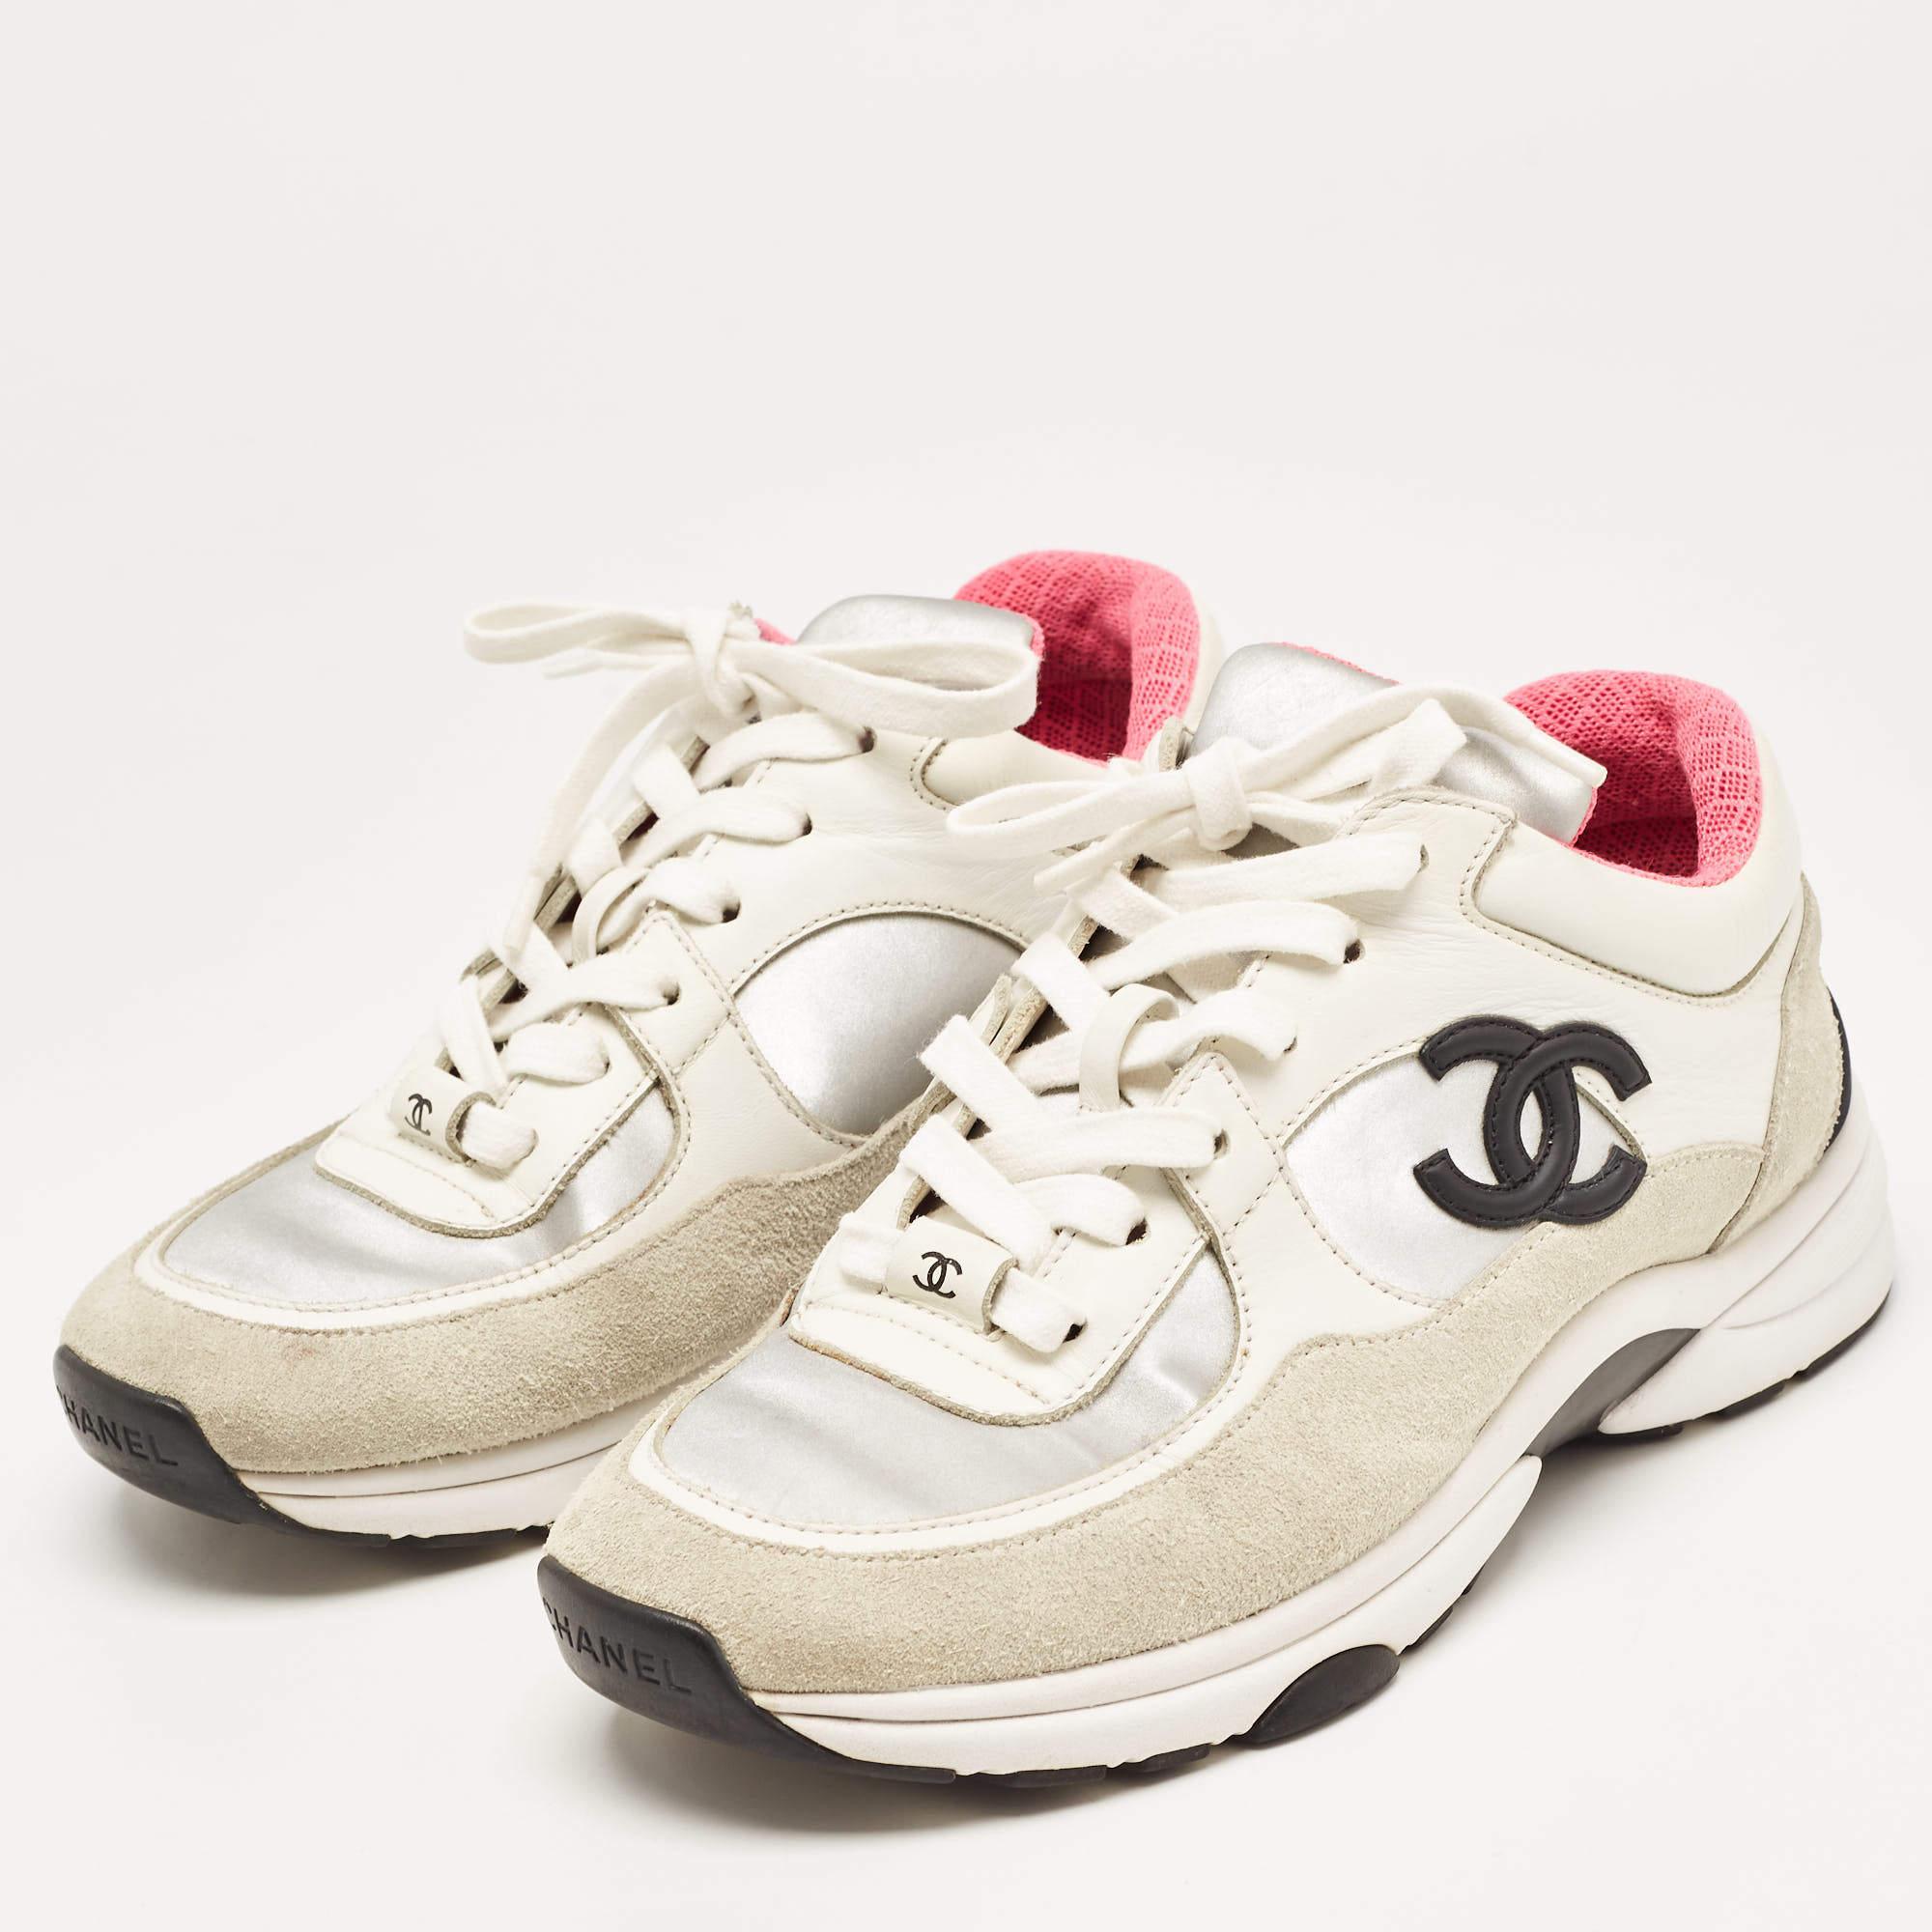 Give your outfit a chic update with this pair of designer sneakers. The creation is sewn perfectly to help you make a statement in them for a long time.

Includes: Original Dustbag